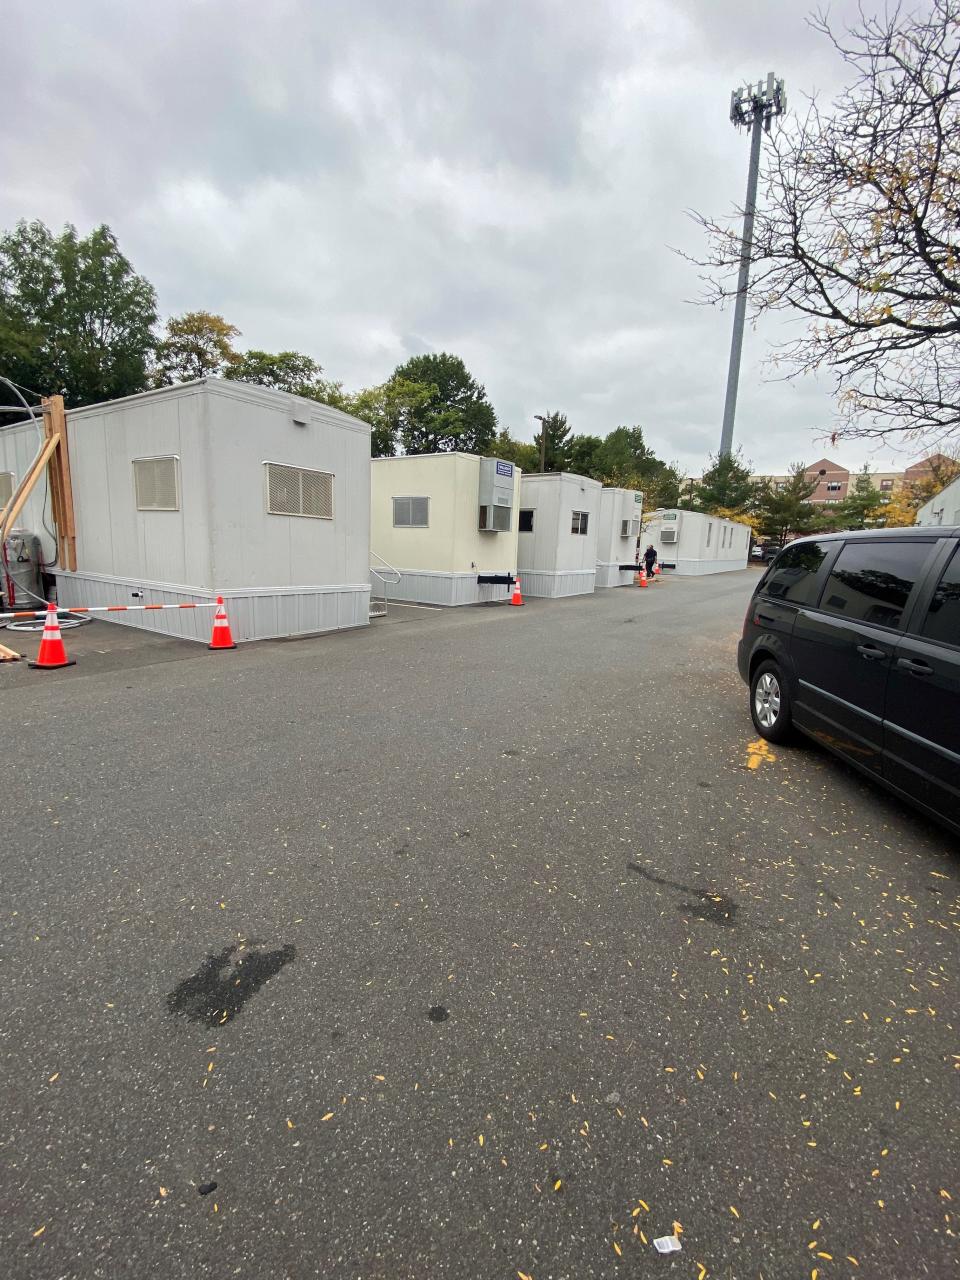 Some township offices have been operating out of trailers at the site, while others have been moved to other locations.